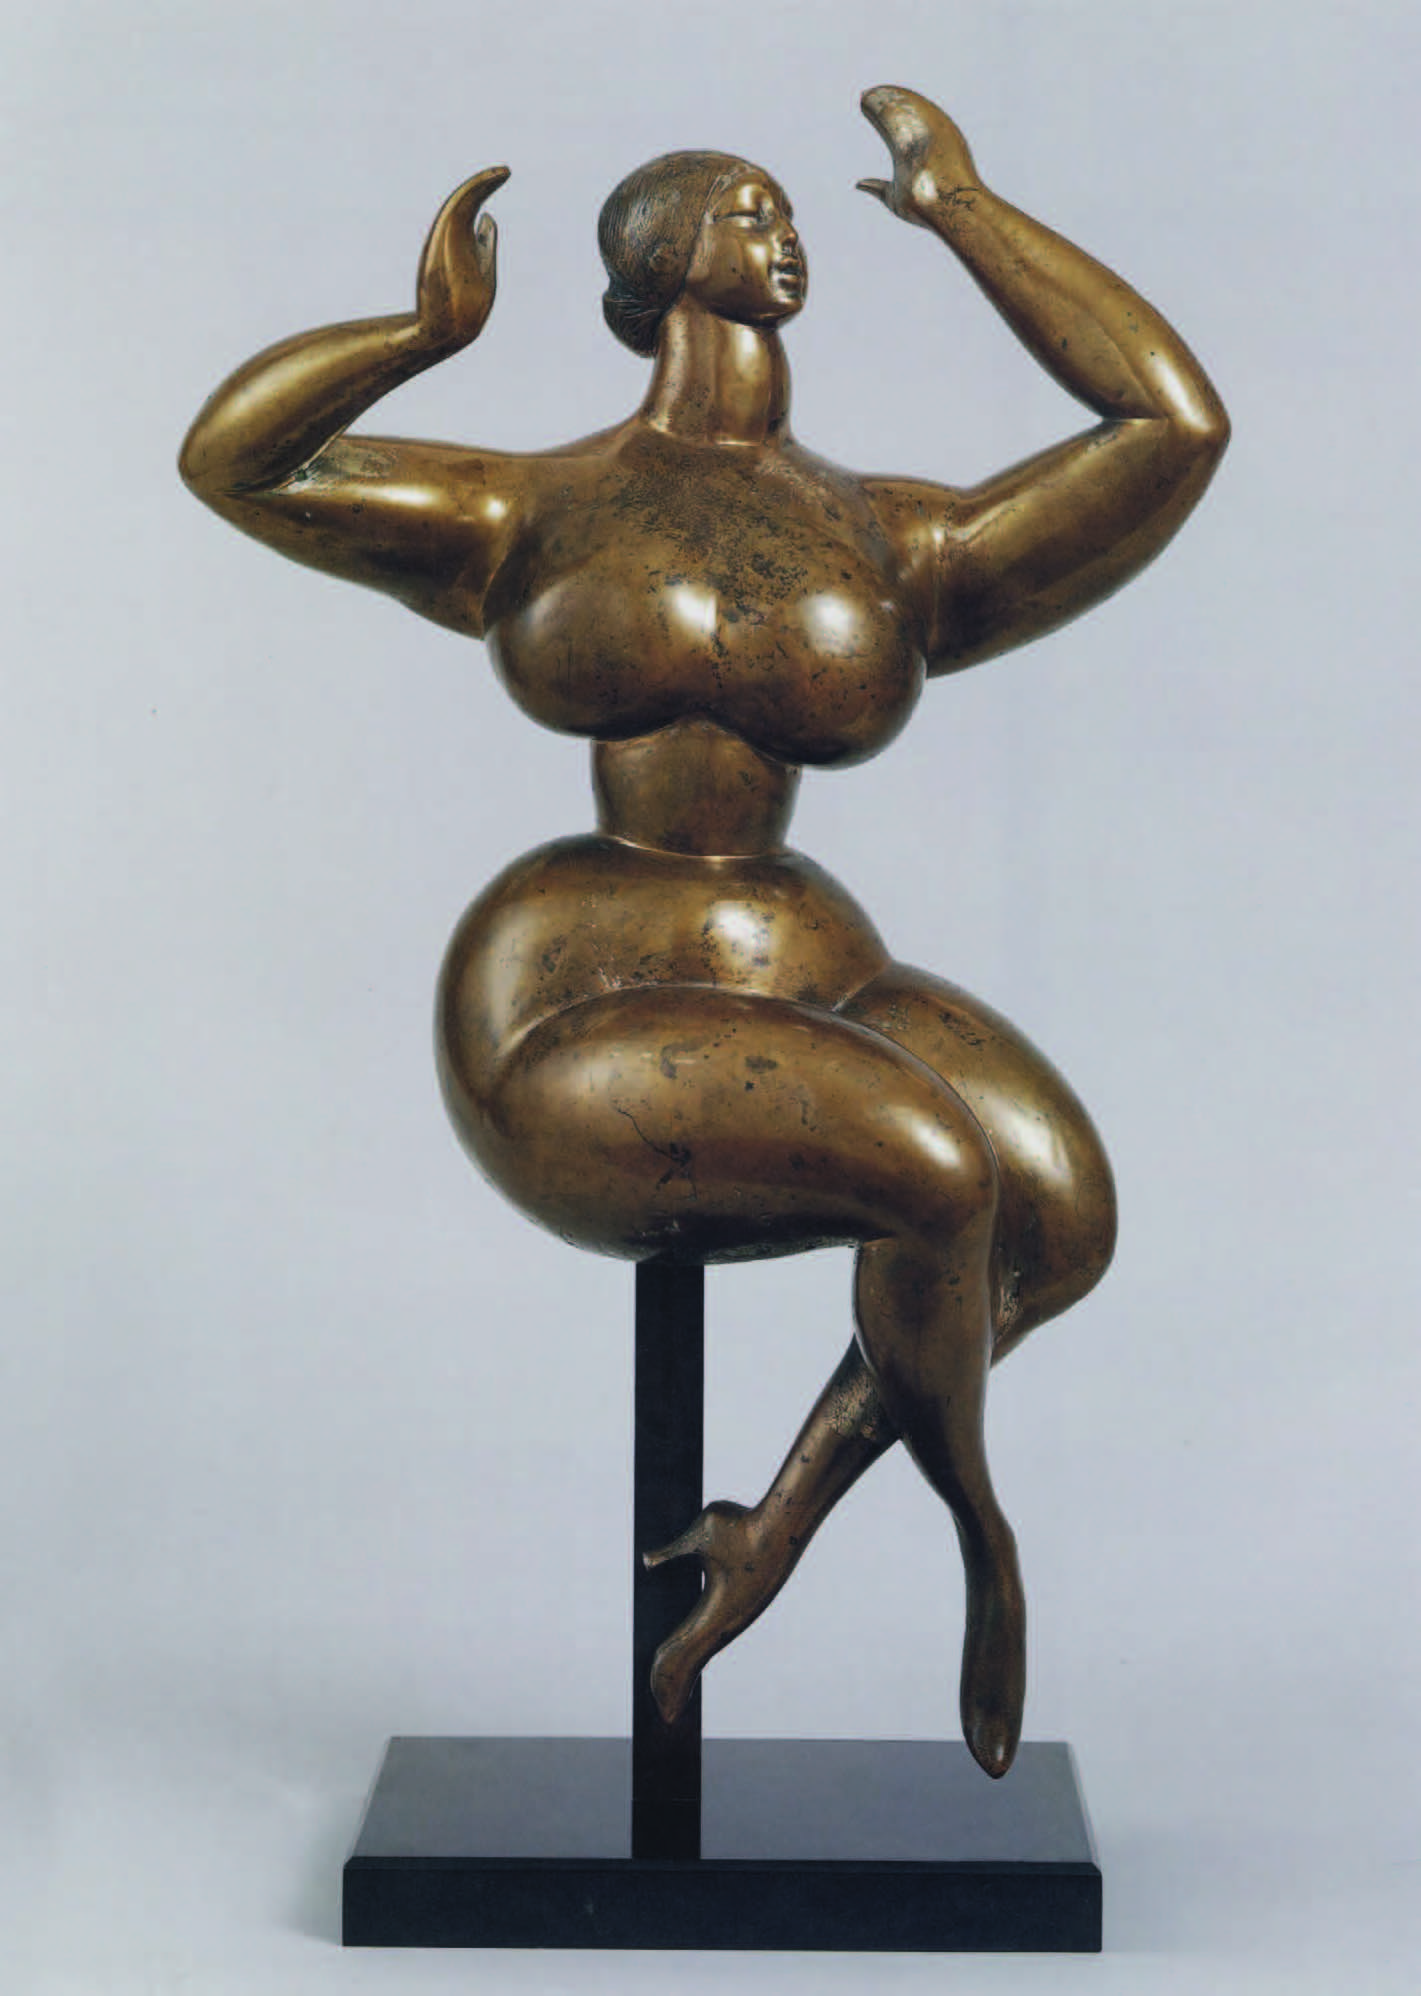 Nude Woman with Upraised Arms. by 1923; cast probably 1924. Gaston Lachaise